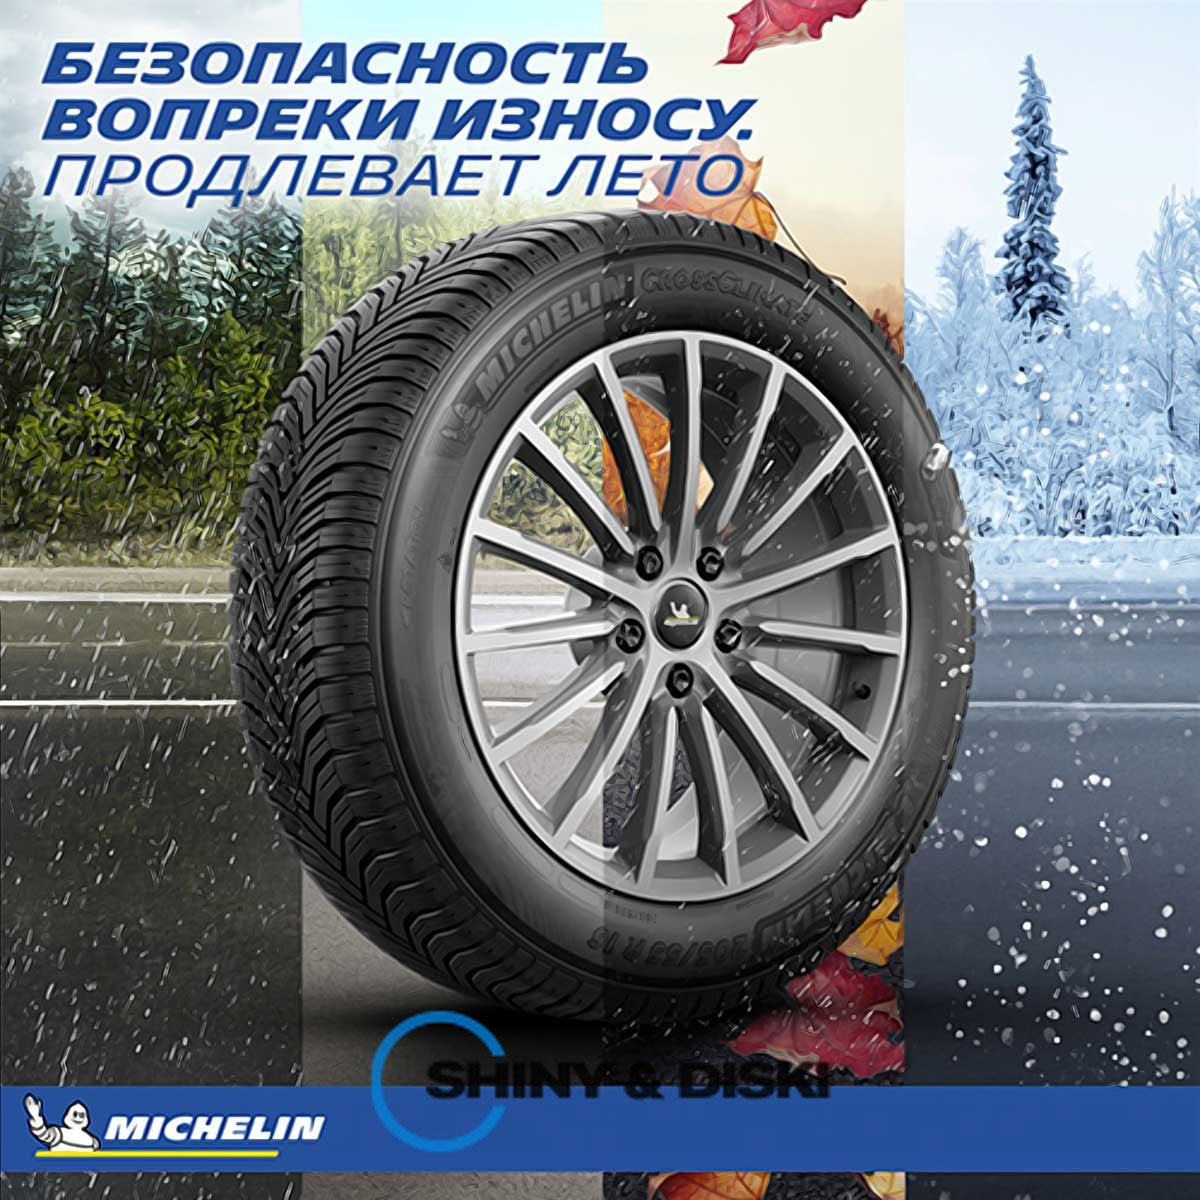 покрышки michelin cross climate+ 235/40 r19 96y